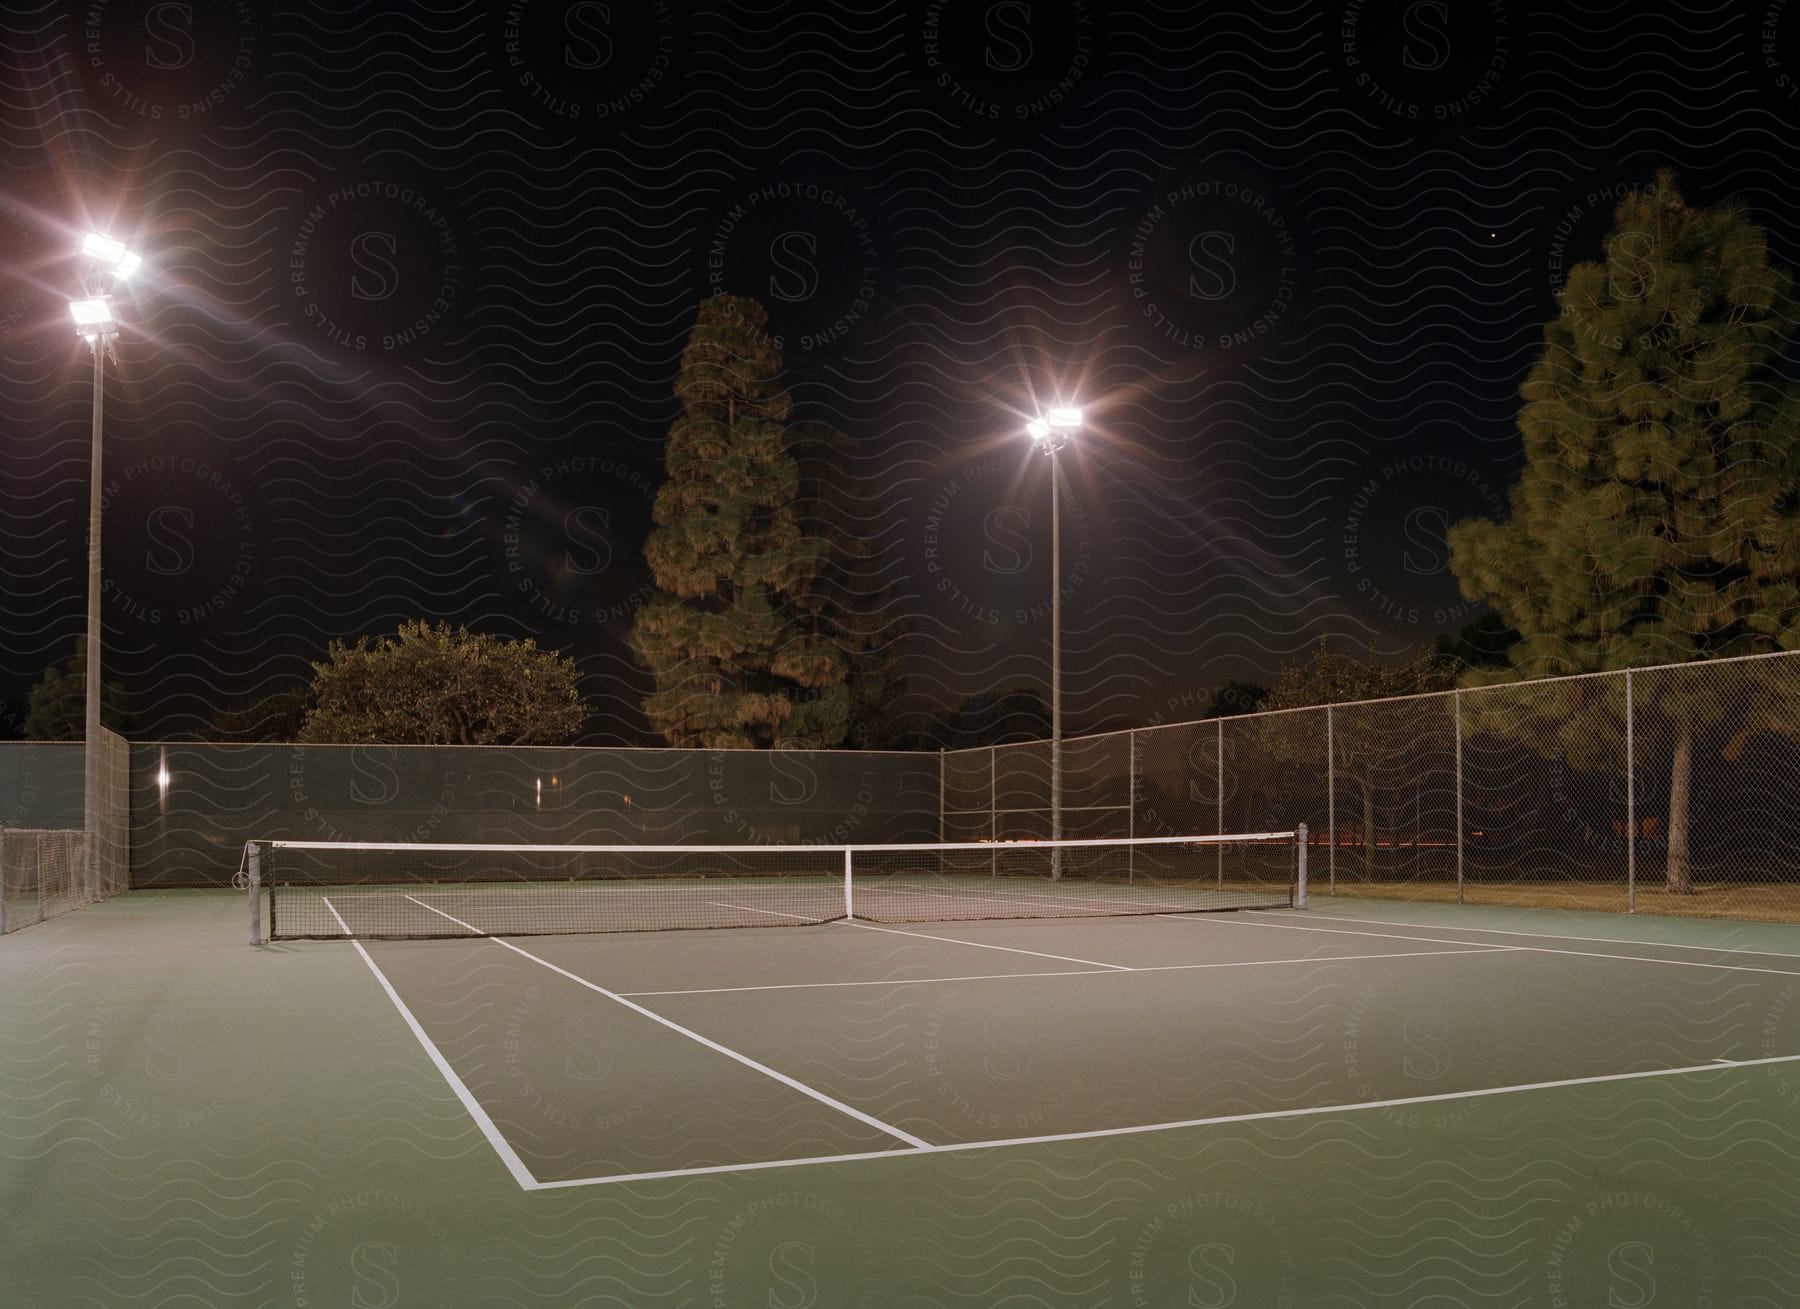 Exterior view of a tennis court at night with floodlights illuminating the empty court